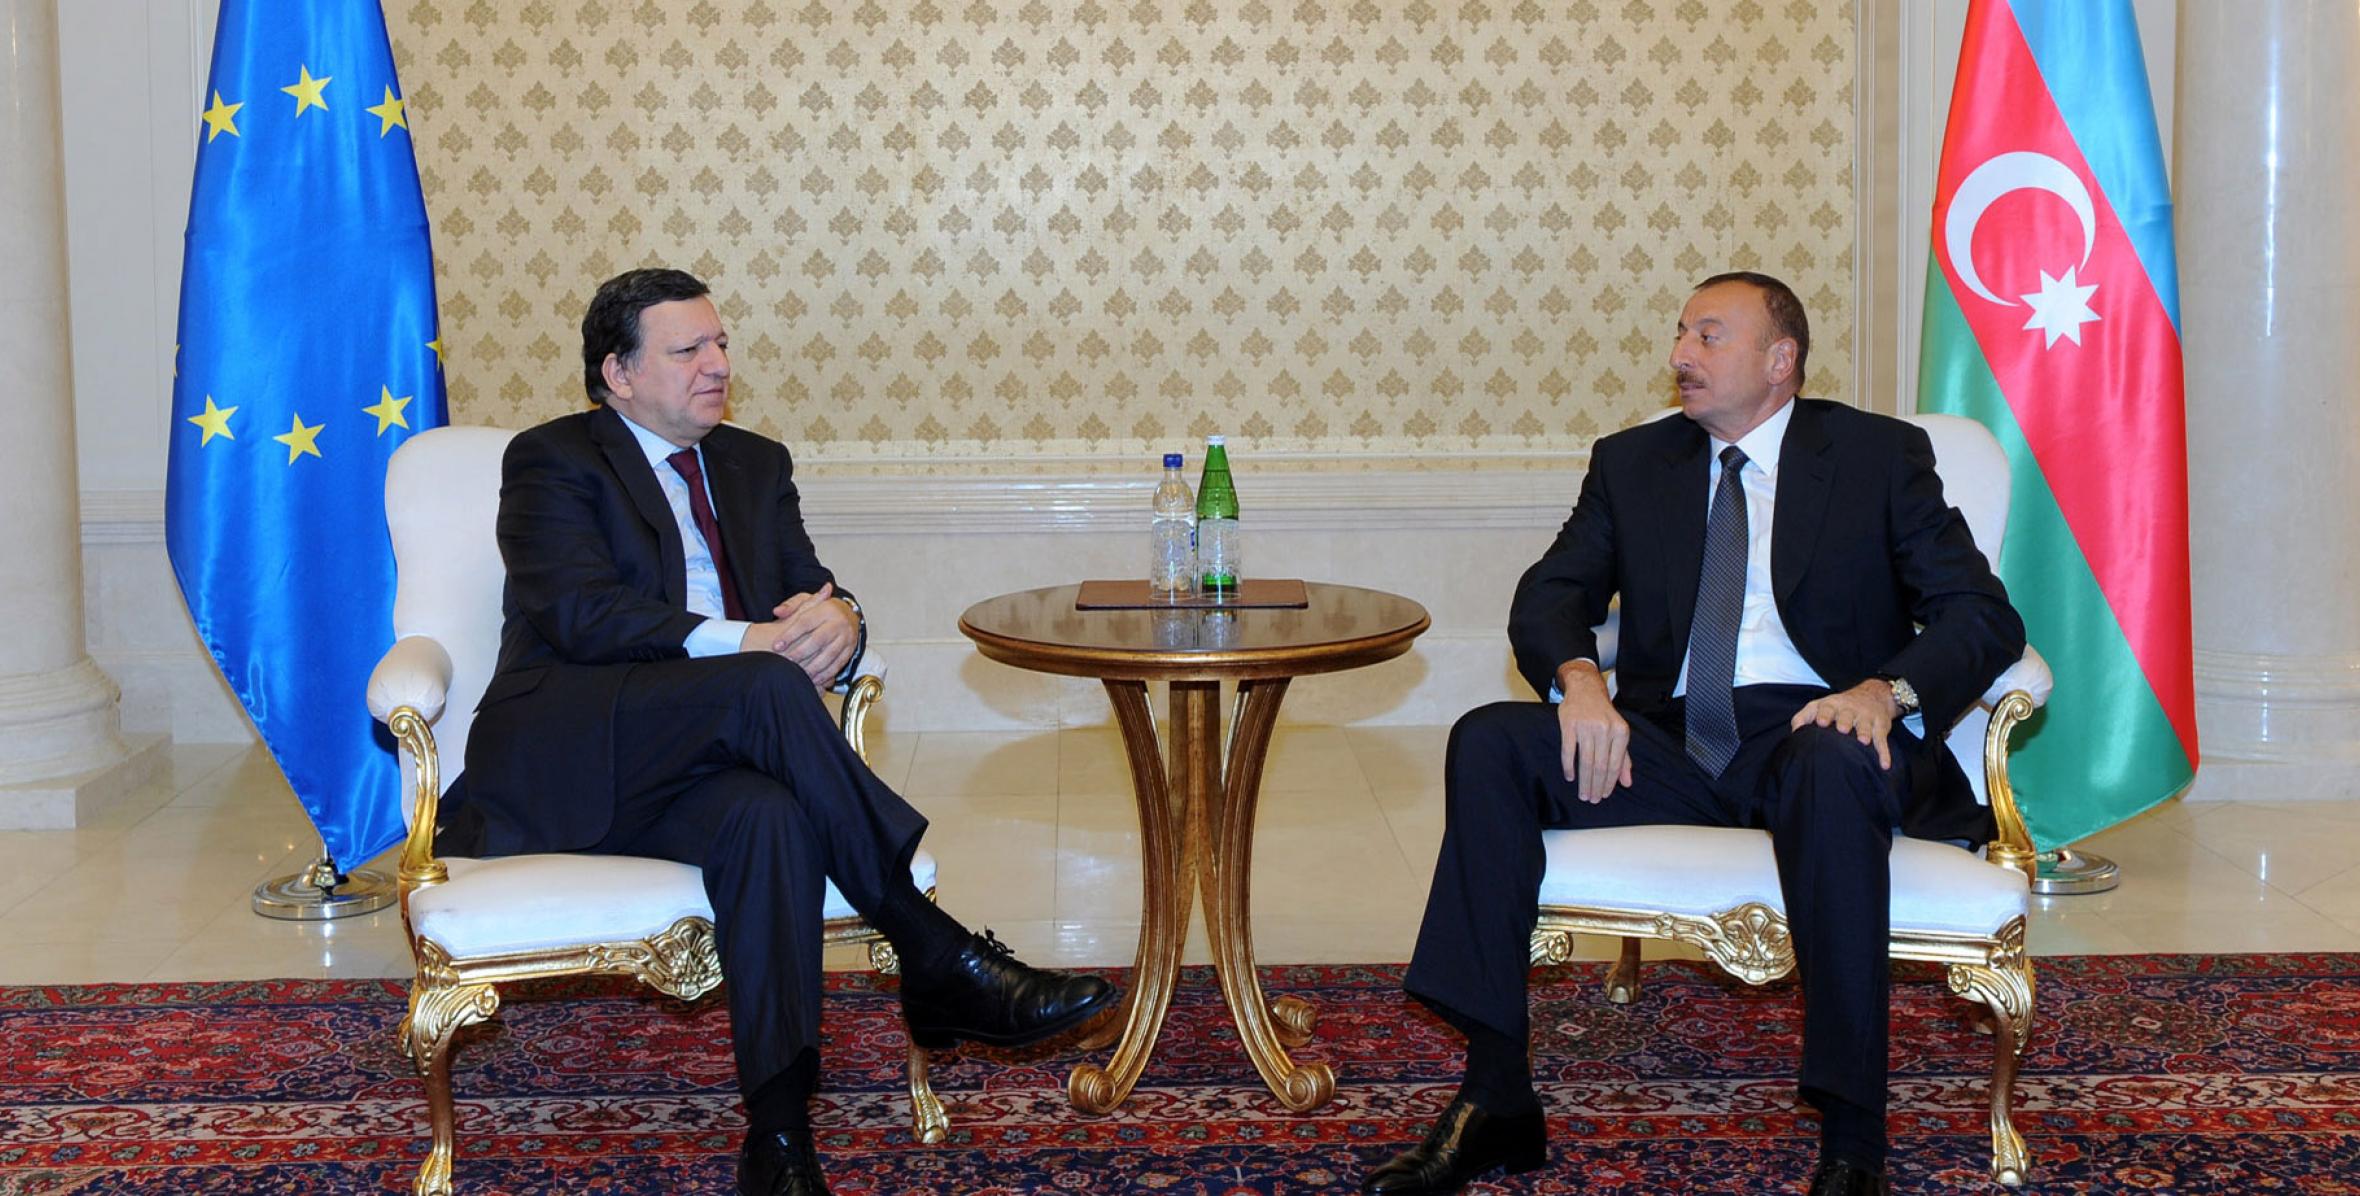 Ilham Aliyev and President of the European Commission José Manuel Barroso held a one-on-one meeting